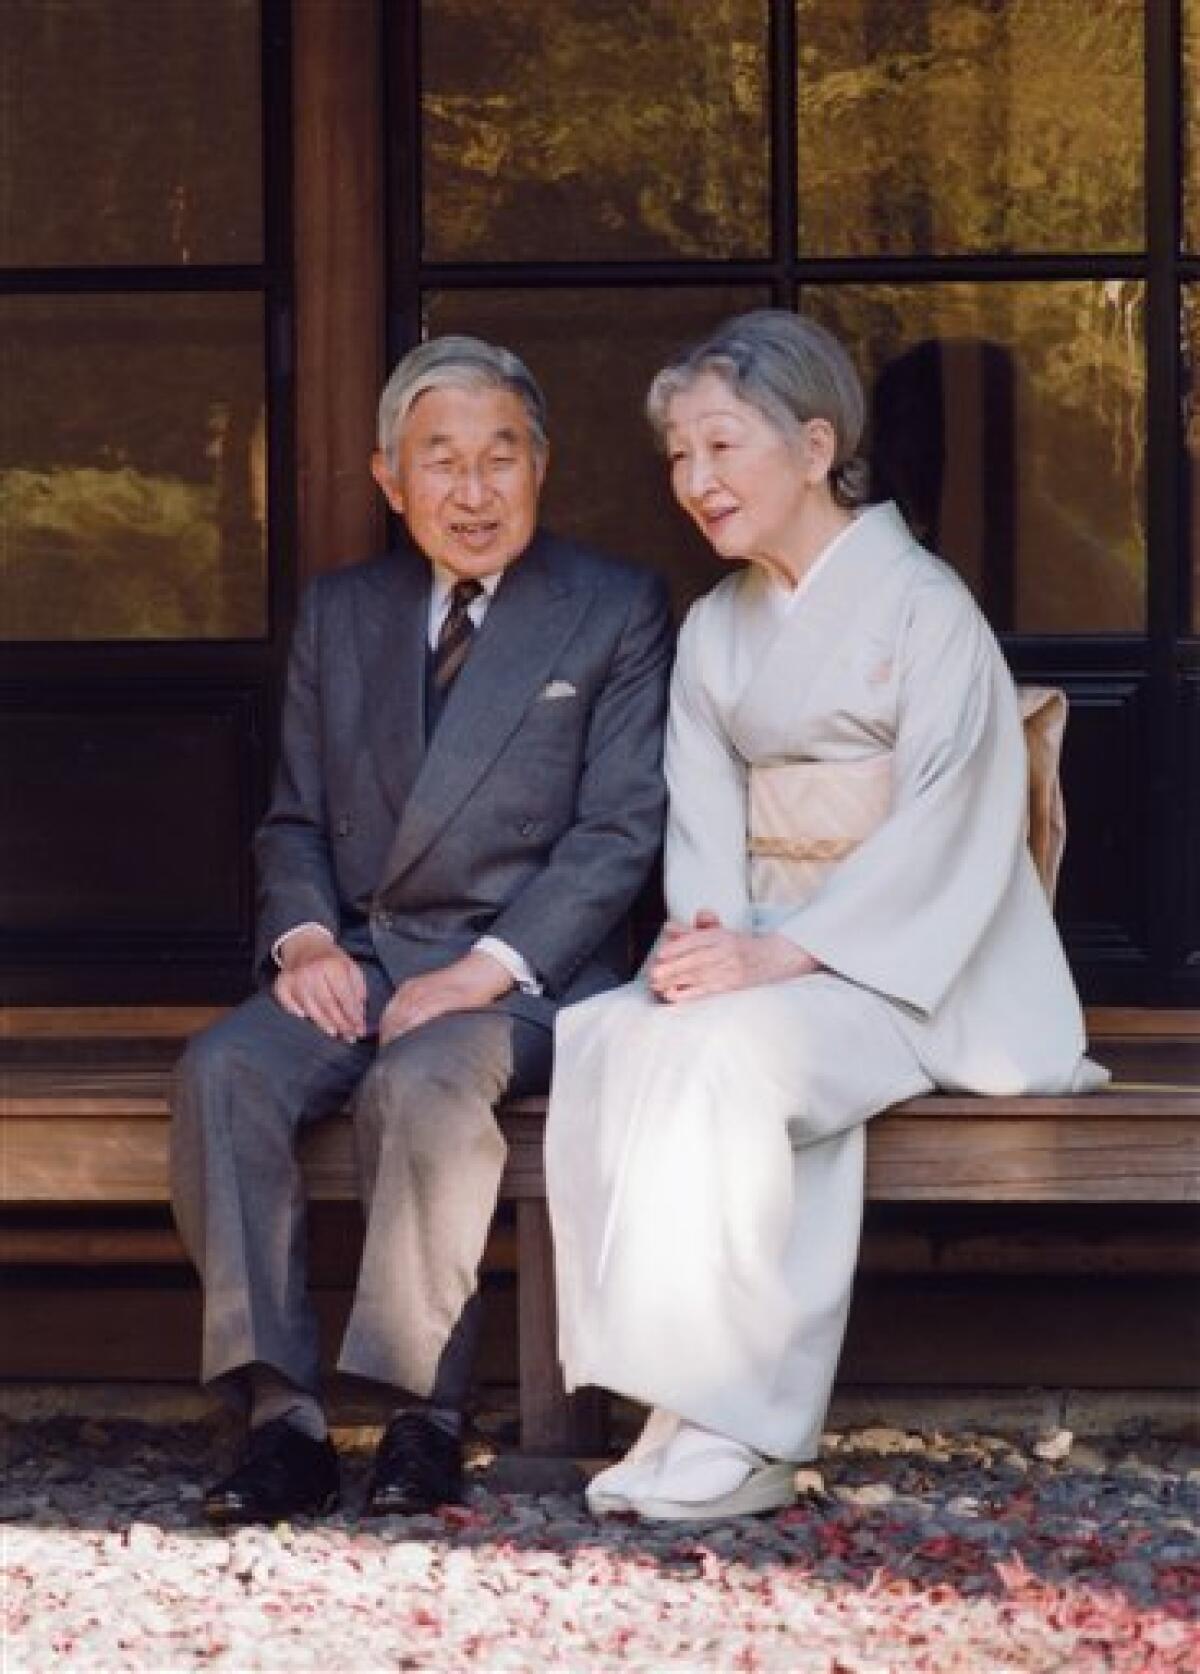 In this photo taken on Monday, Nov. 29, 2010 and released by the Imperial Household Agency of Japan, Emperor Akihito and Empress Michiko chat at Sokintei arbor during their stroll at Fukiage Garden in the Imperial Palace in Tokyo. Akihito celebrates his 77th birthday Thursday, Dec. 23, 2010. (AP Photo/Imperial Household Agency of Japan) EDITORIAL USE ONLY